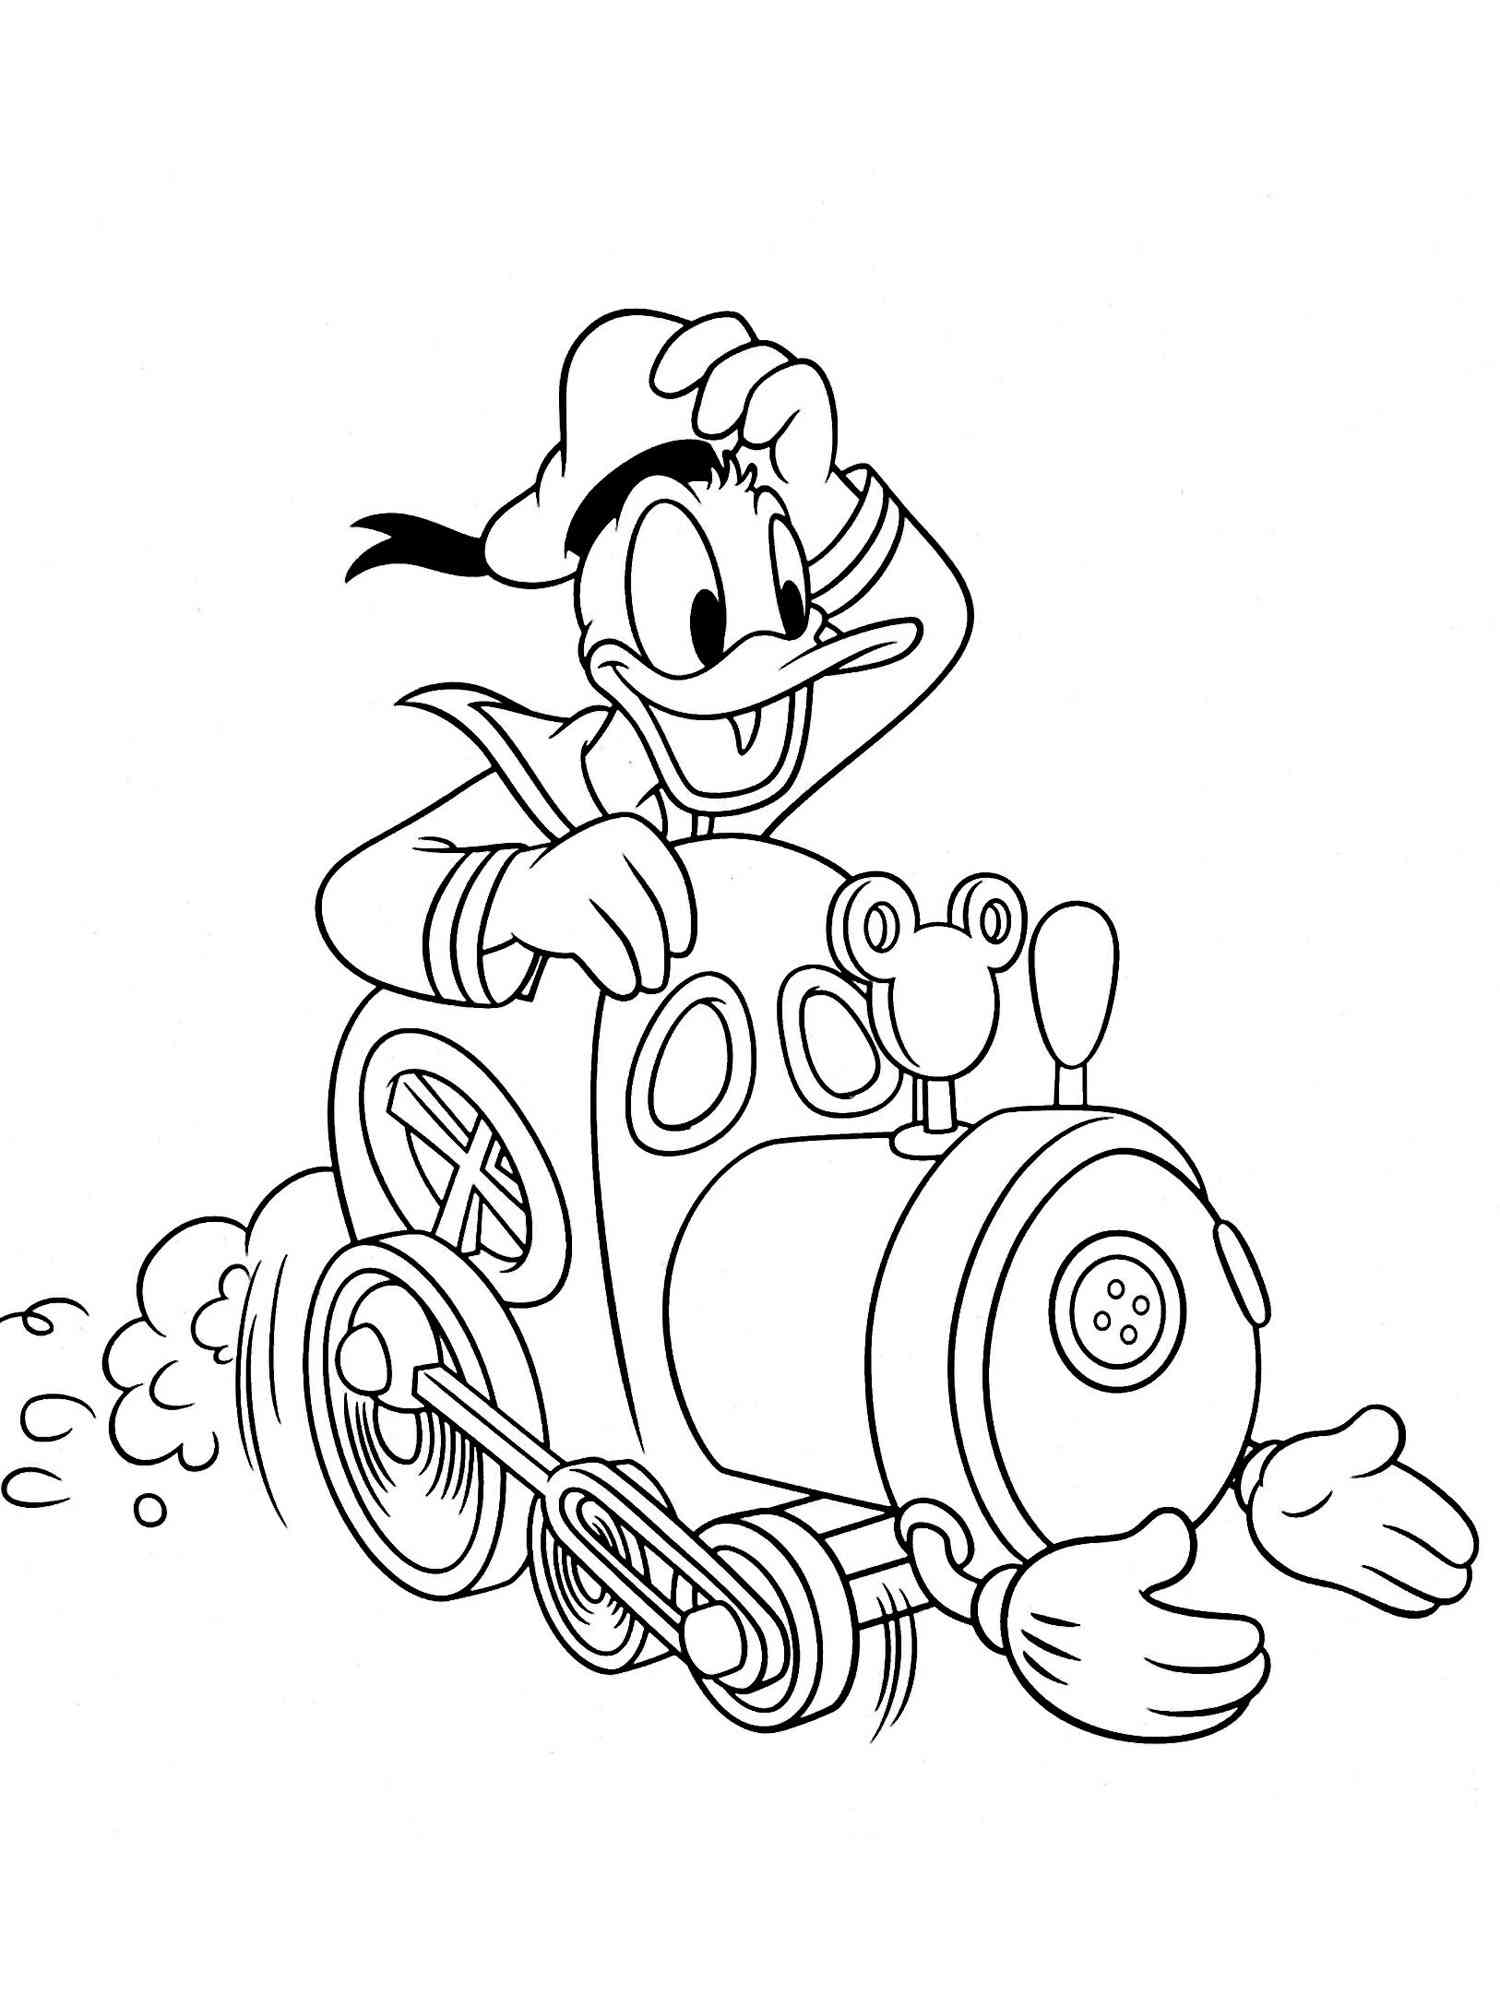 Donald Duck 1 coloring page